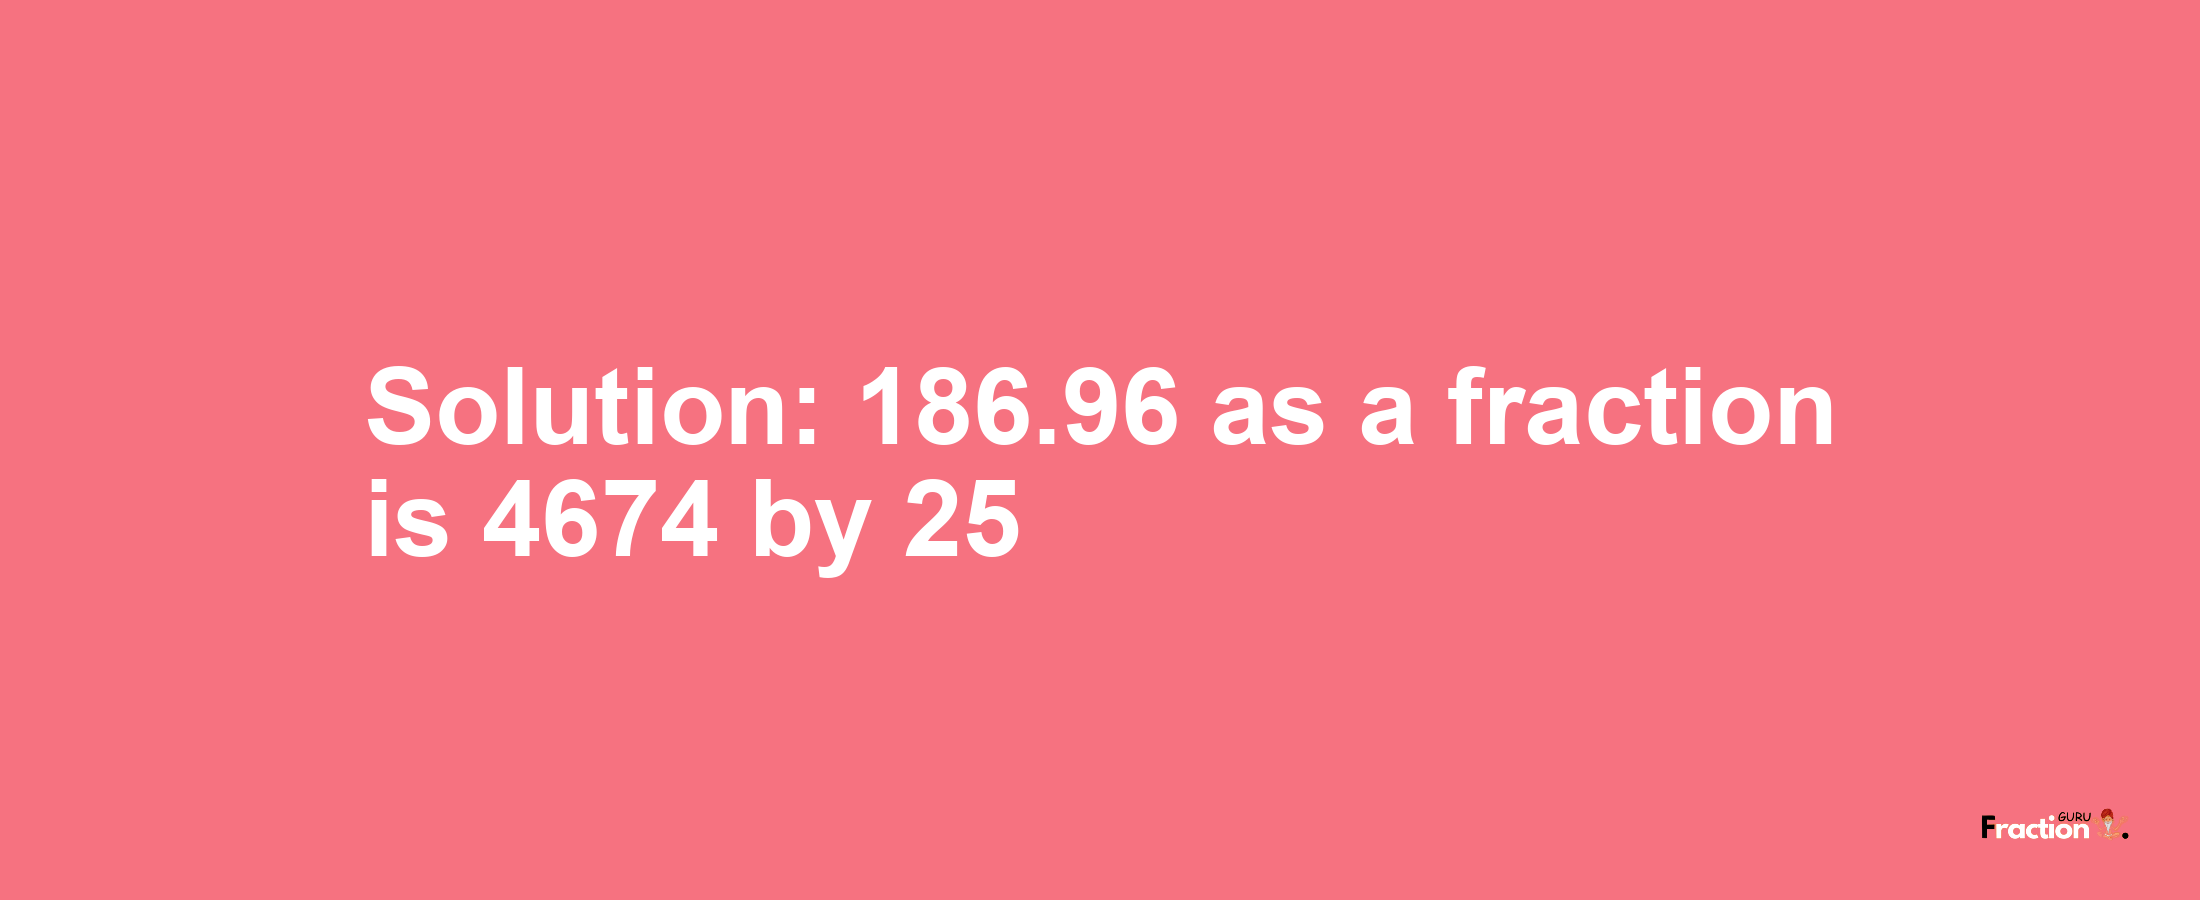 Solution:186.96 as a fraction is 4674/25